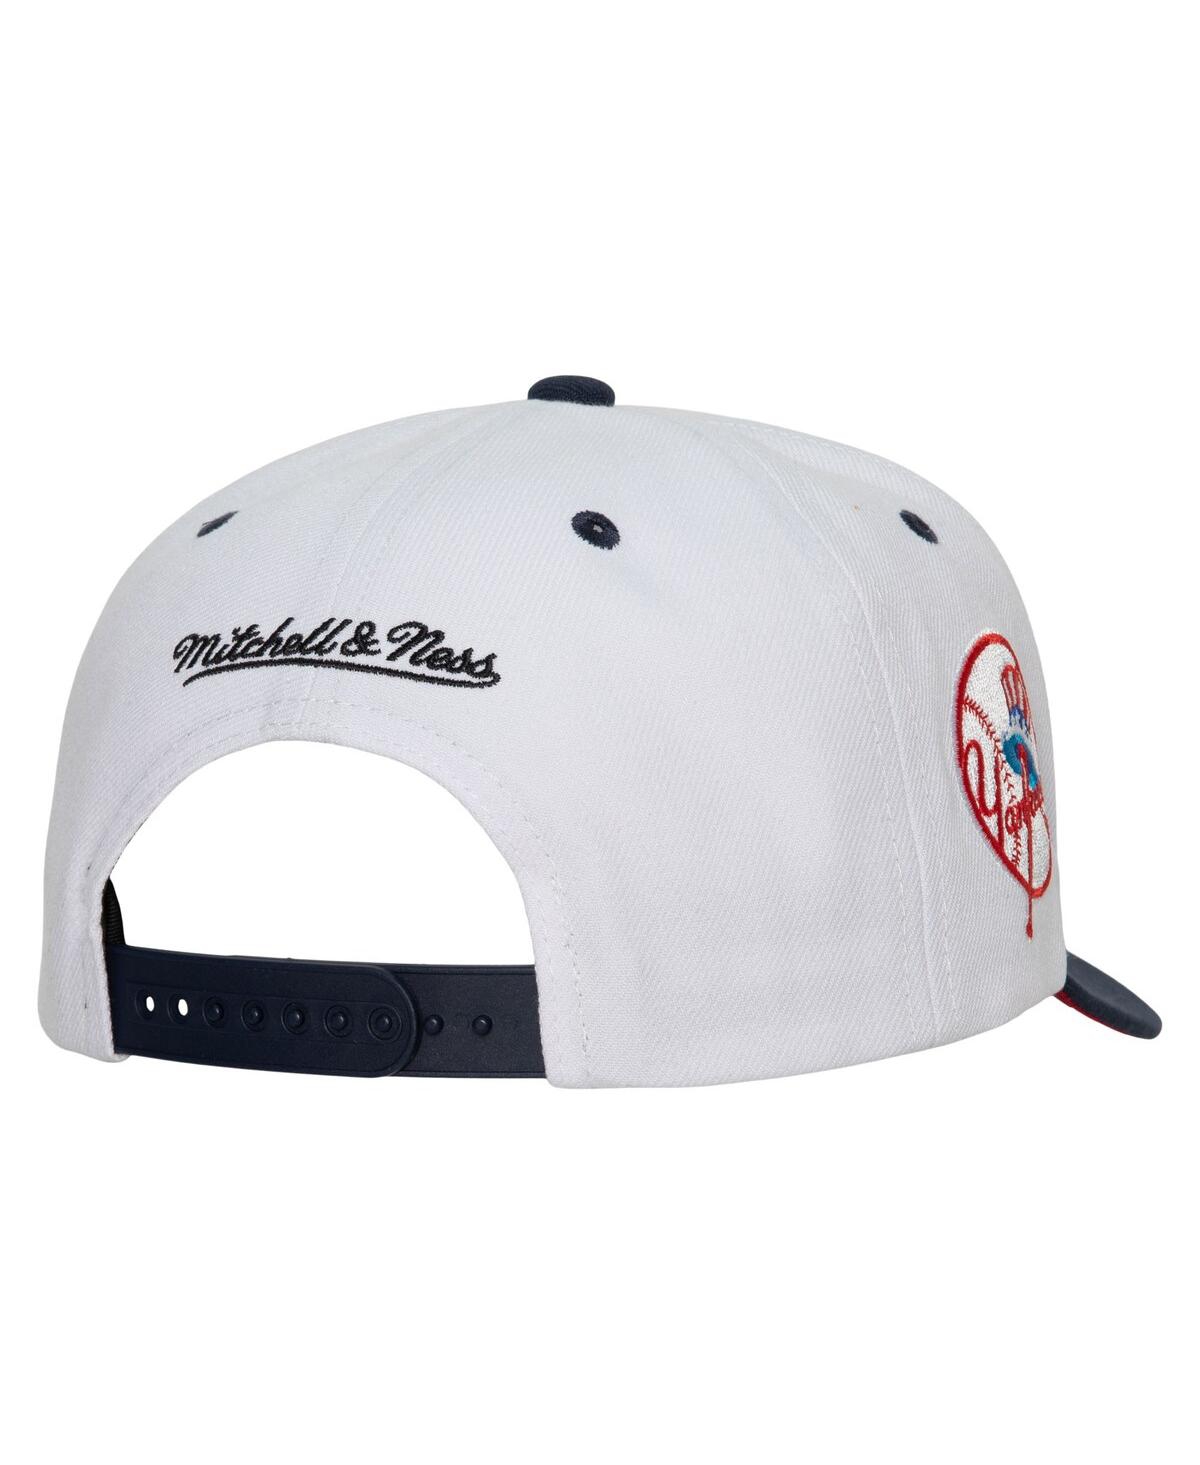 Shop Mitchell & Ness Men's  White New York Yankees Cooperstown Collection Pro Crown Snapback Hat